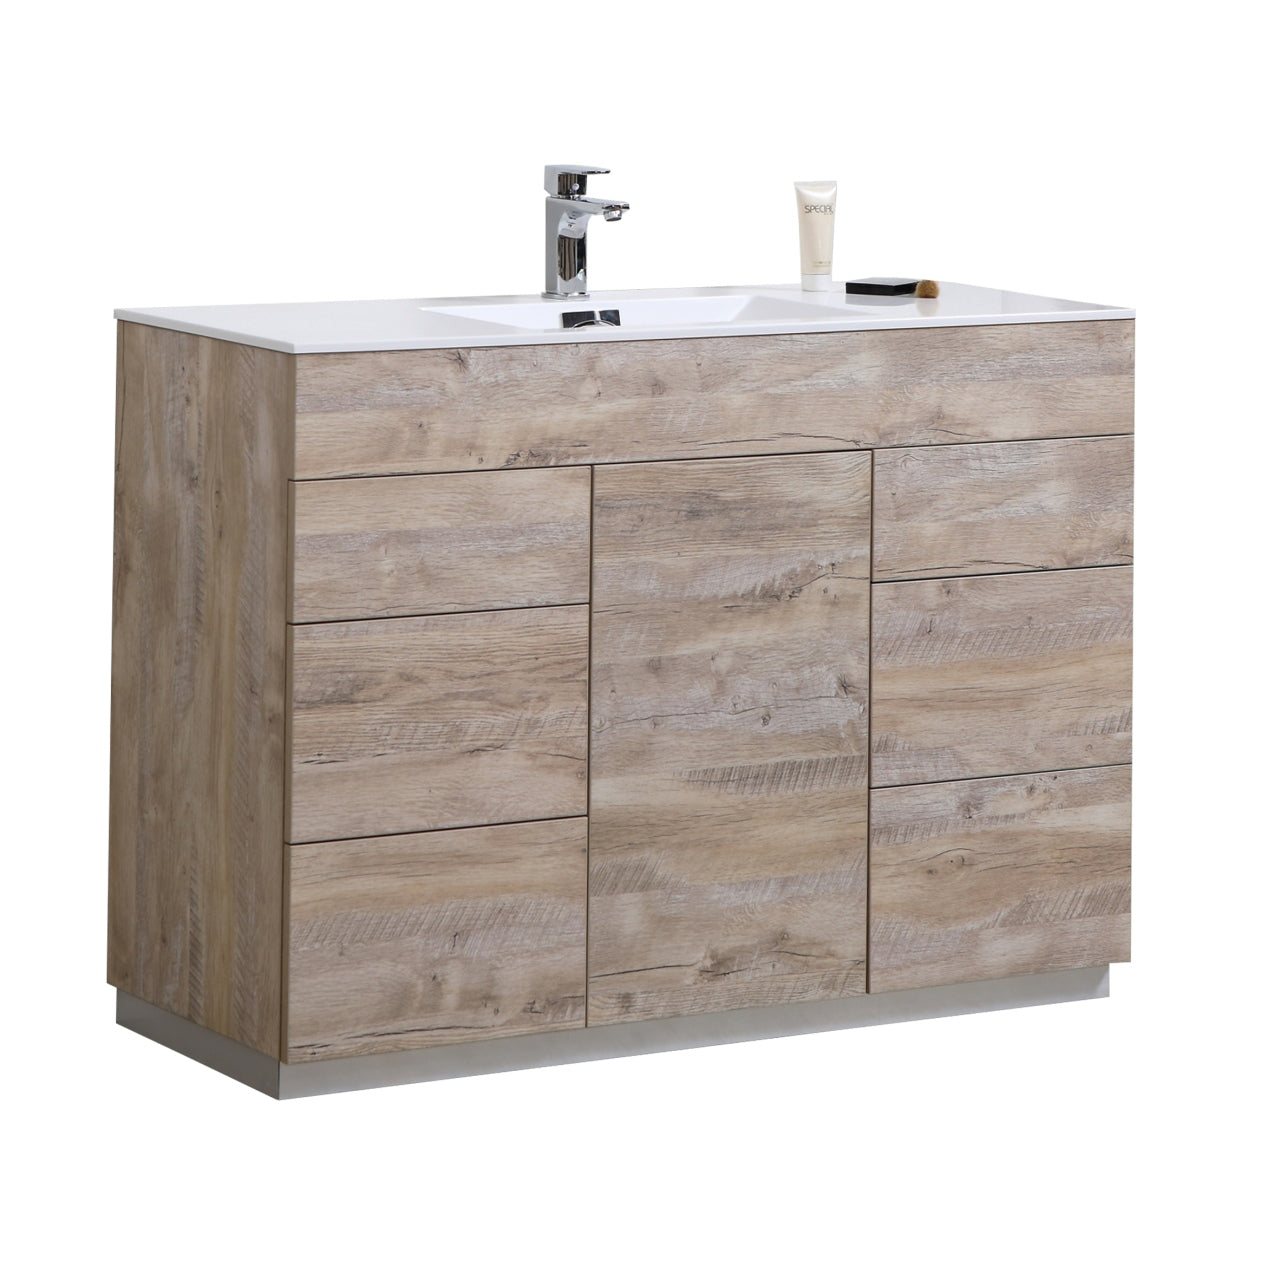 KUBEBATH Milano KFM48S-NW 48" Single Bathroom Vanity in Nature Wood with White Acrylic Composite, Integrated Sink, Angled View